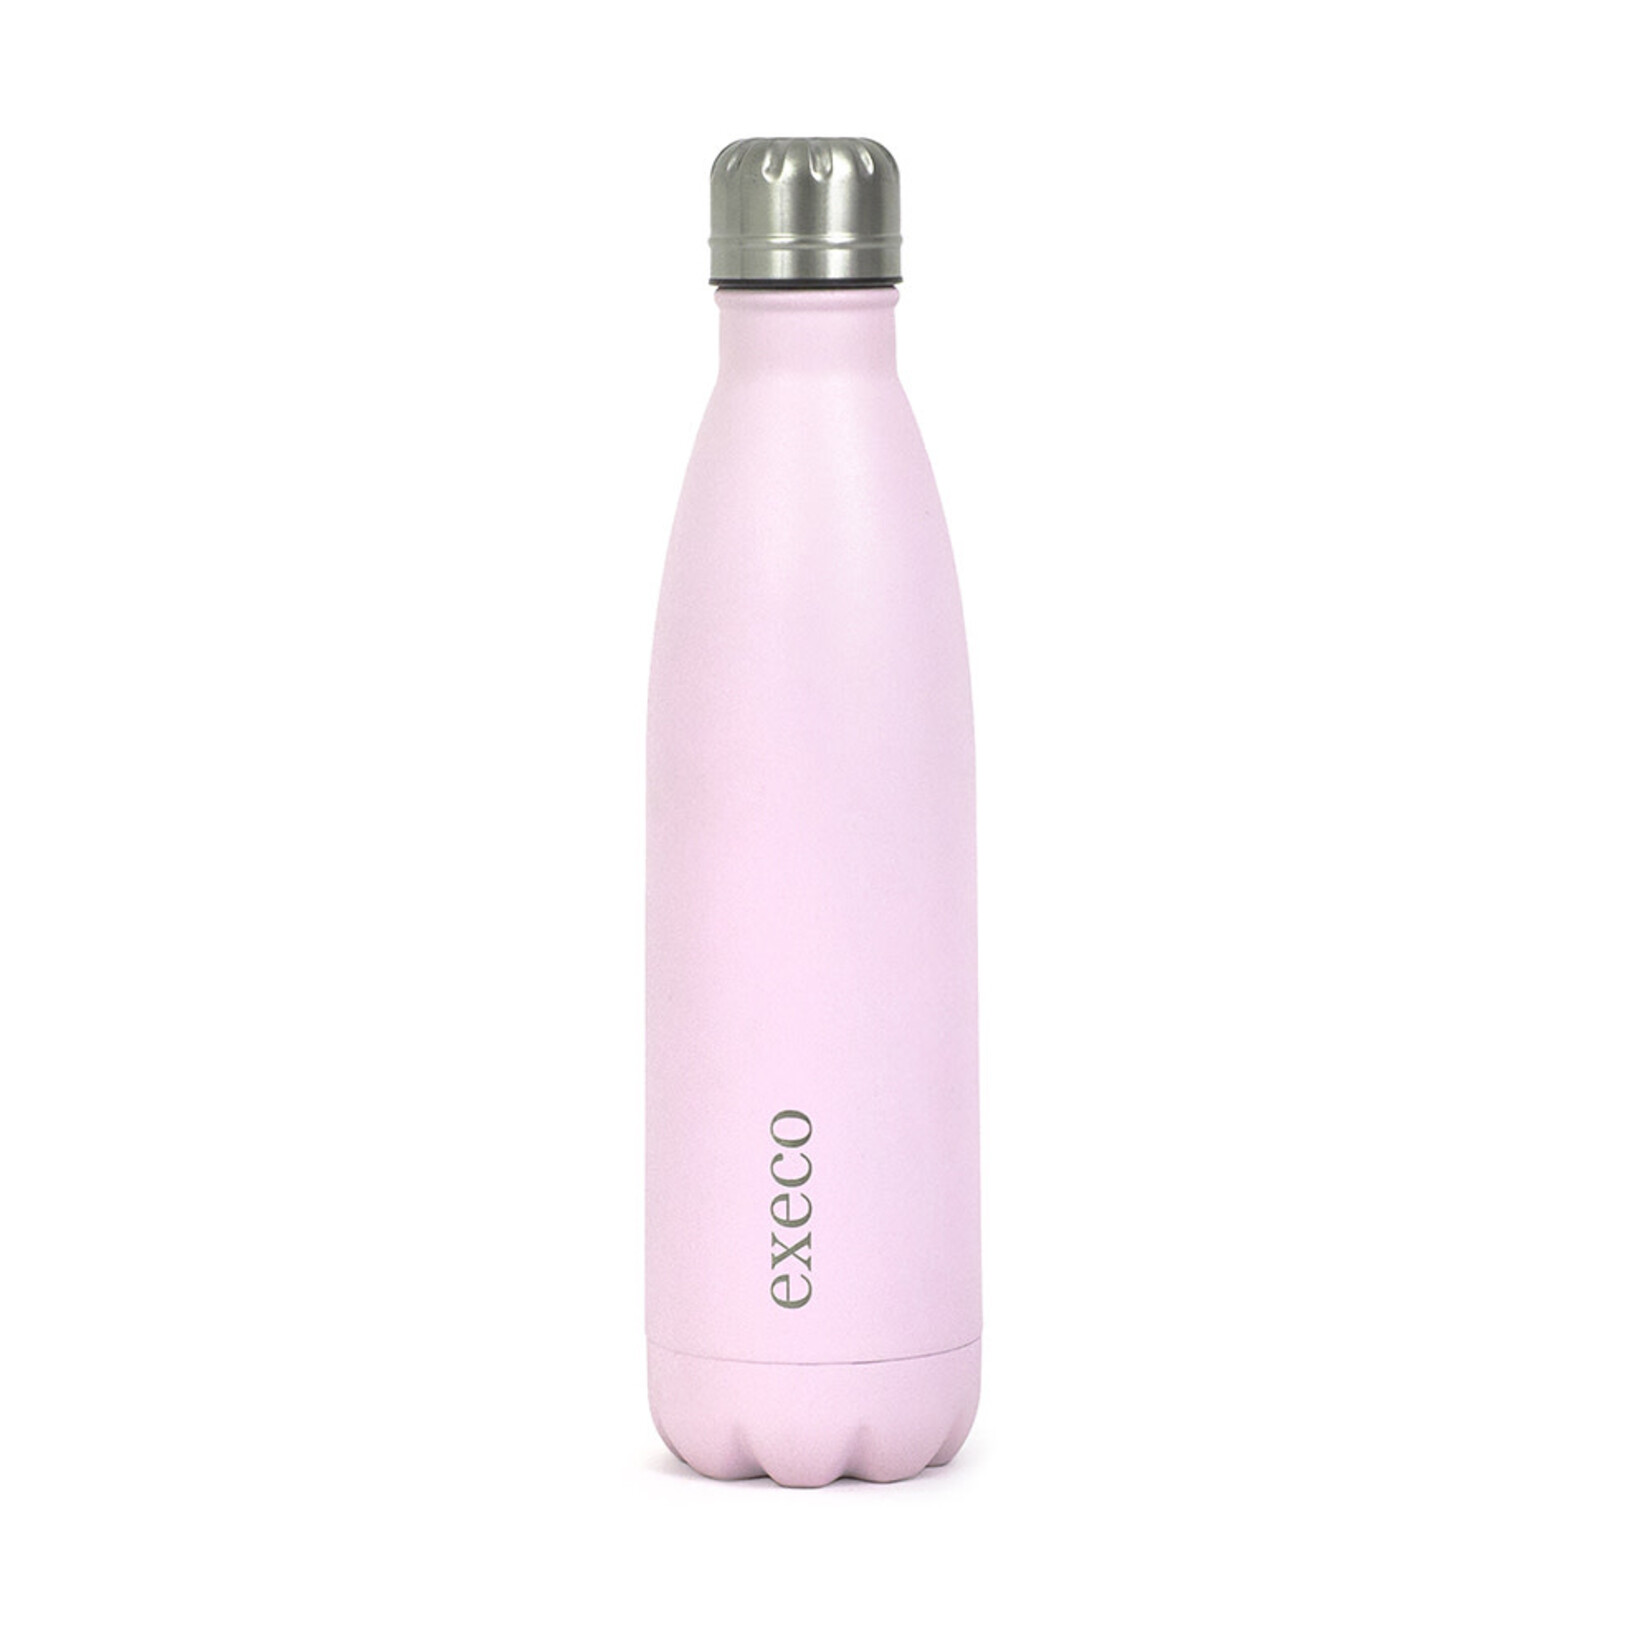 GEOCAN GEO-CAN - Insulated stainless steel water bottle 'Light pink'